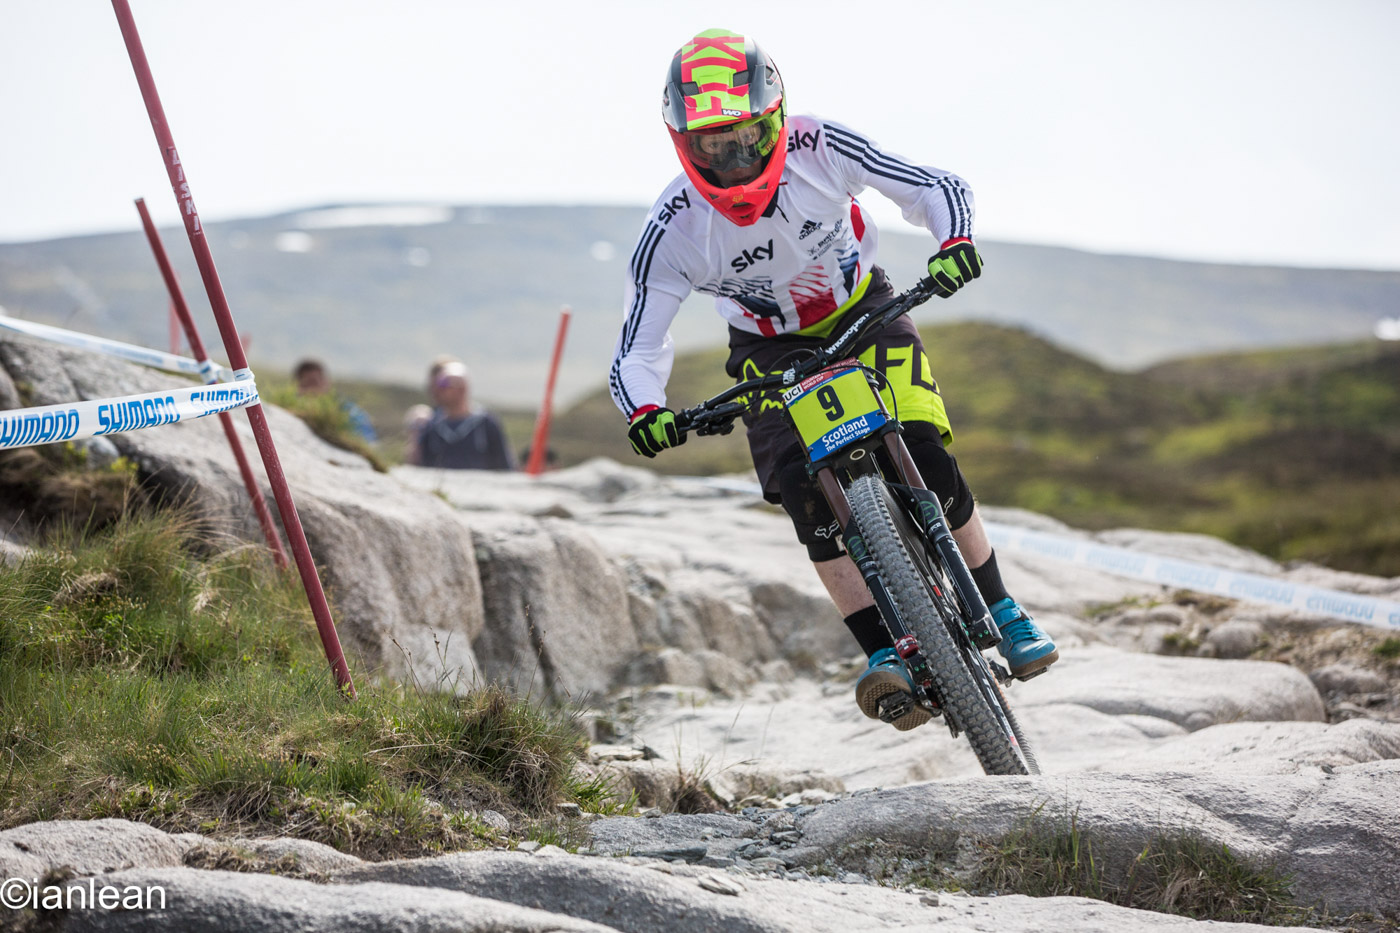 Charlie Hatton Fort William World Cup Wideopenmag (15 of 61)